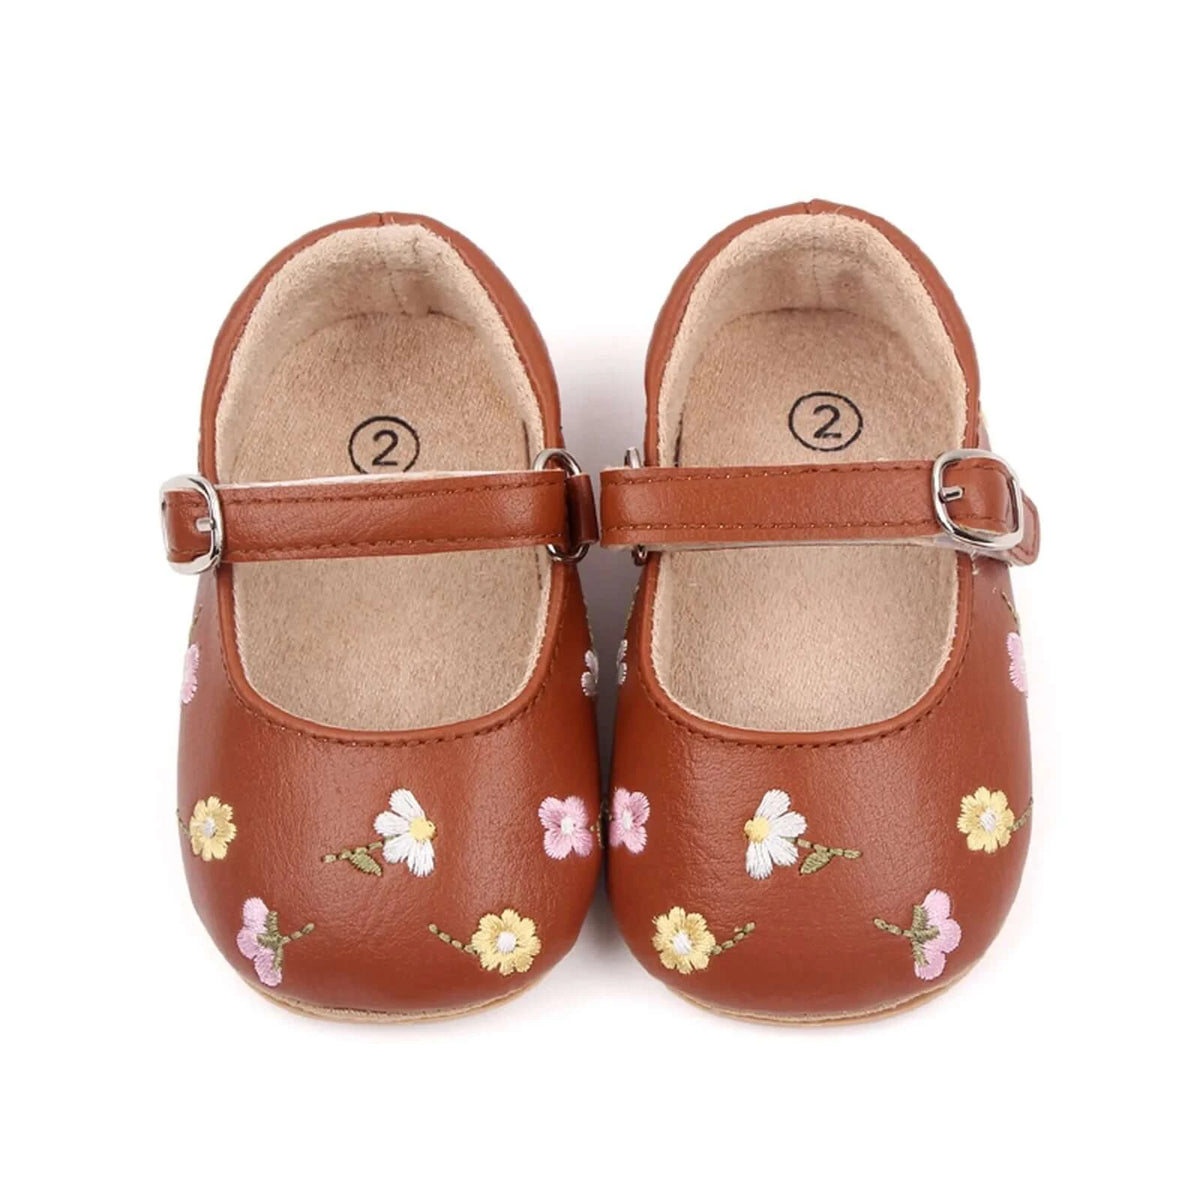 Maeve Flower Baby Shoes | Vegan Leather with Floral Embroidery - Lulu Babe